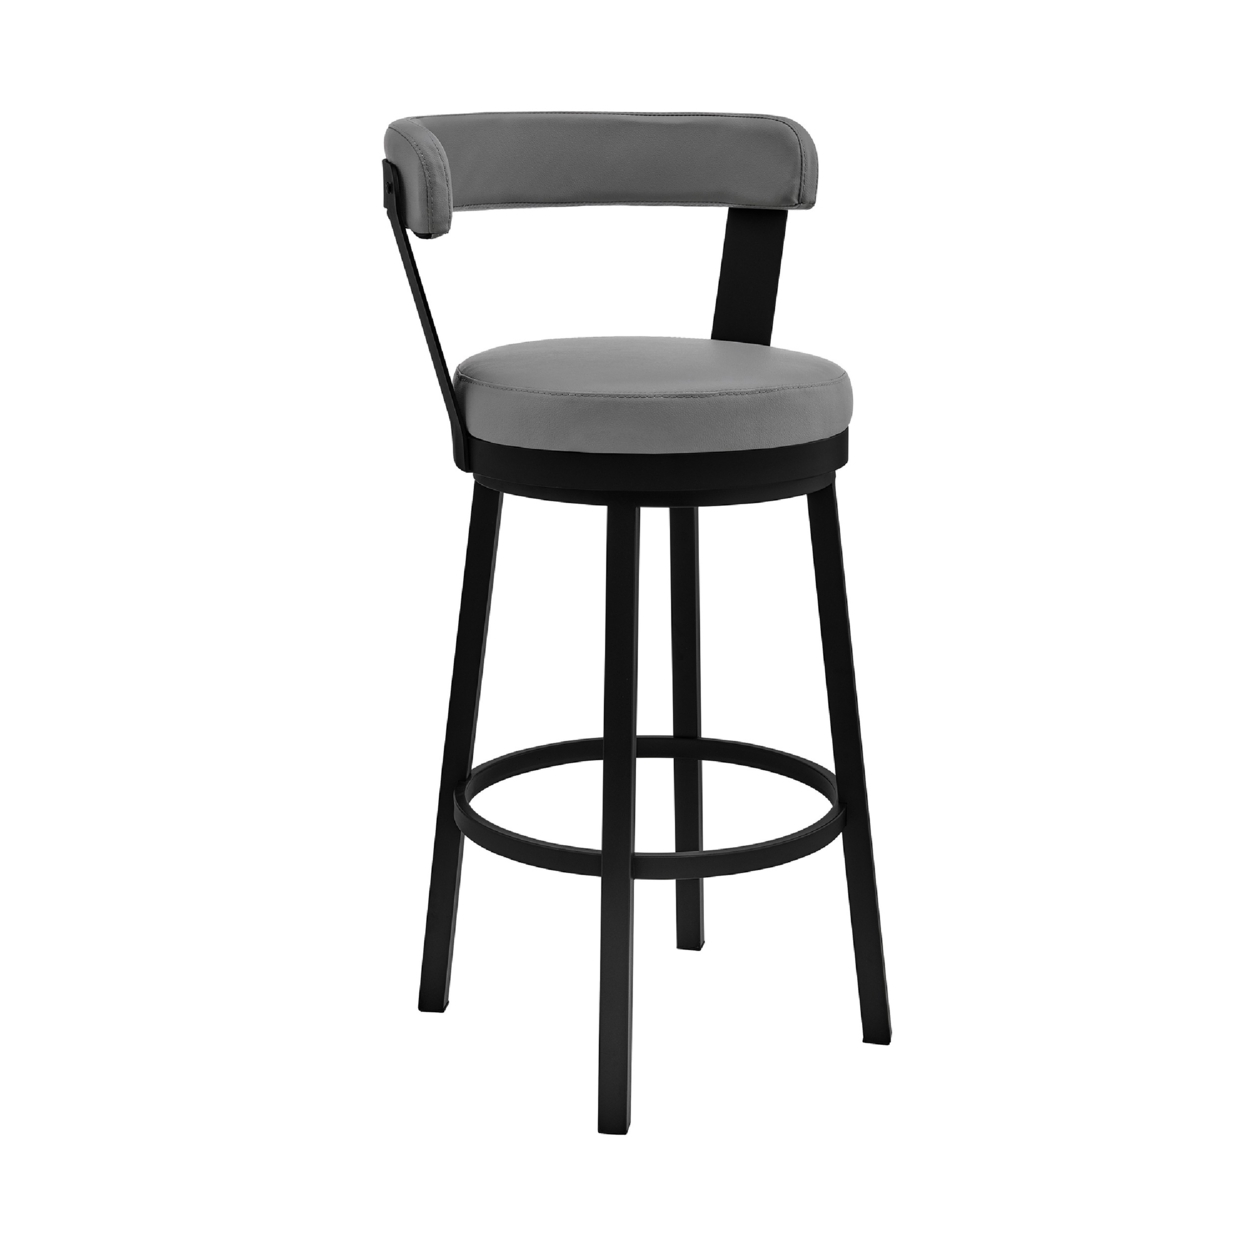 Swivel Counter Barstool With Curved Open Back And Metal Legs, Light Gray- Saltoro Sherpi